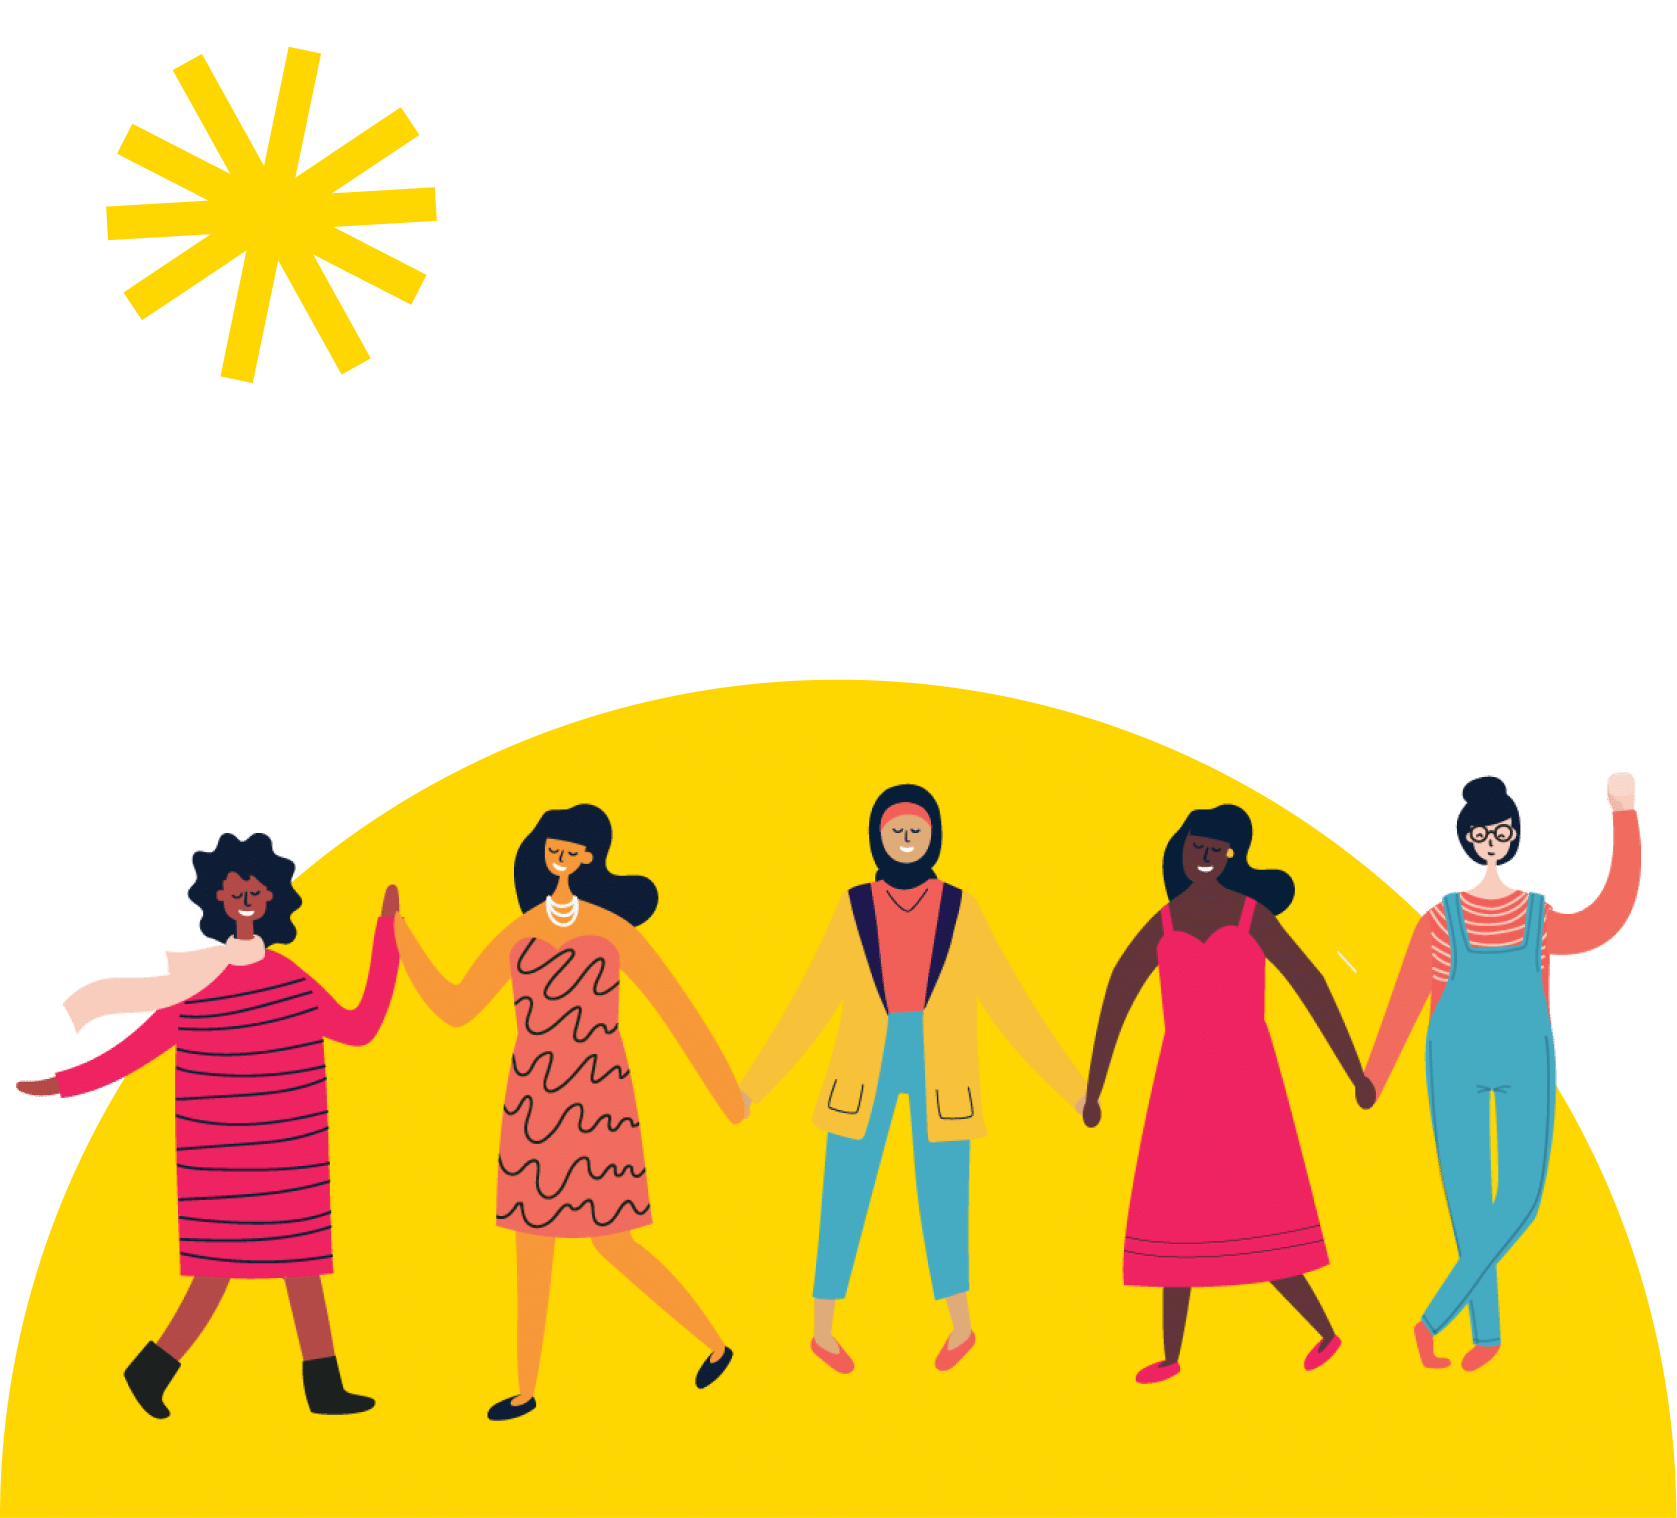 Illustration of a line of women holding hands with yellow graphics in the background.